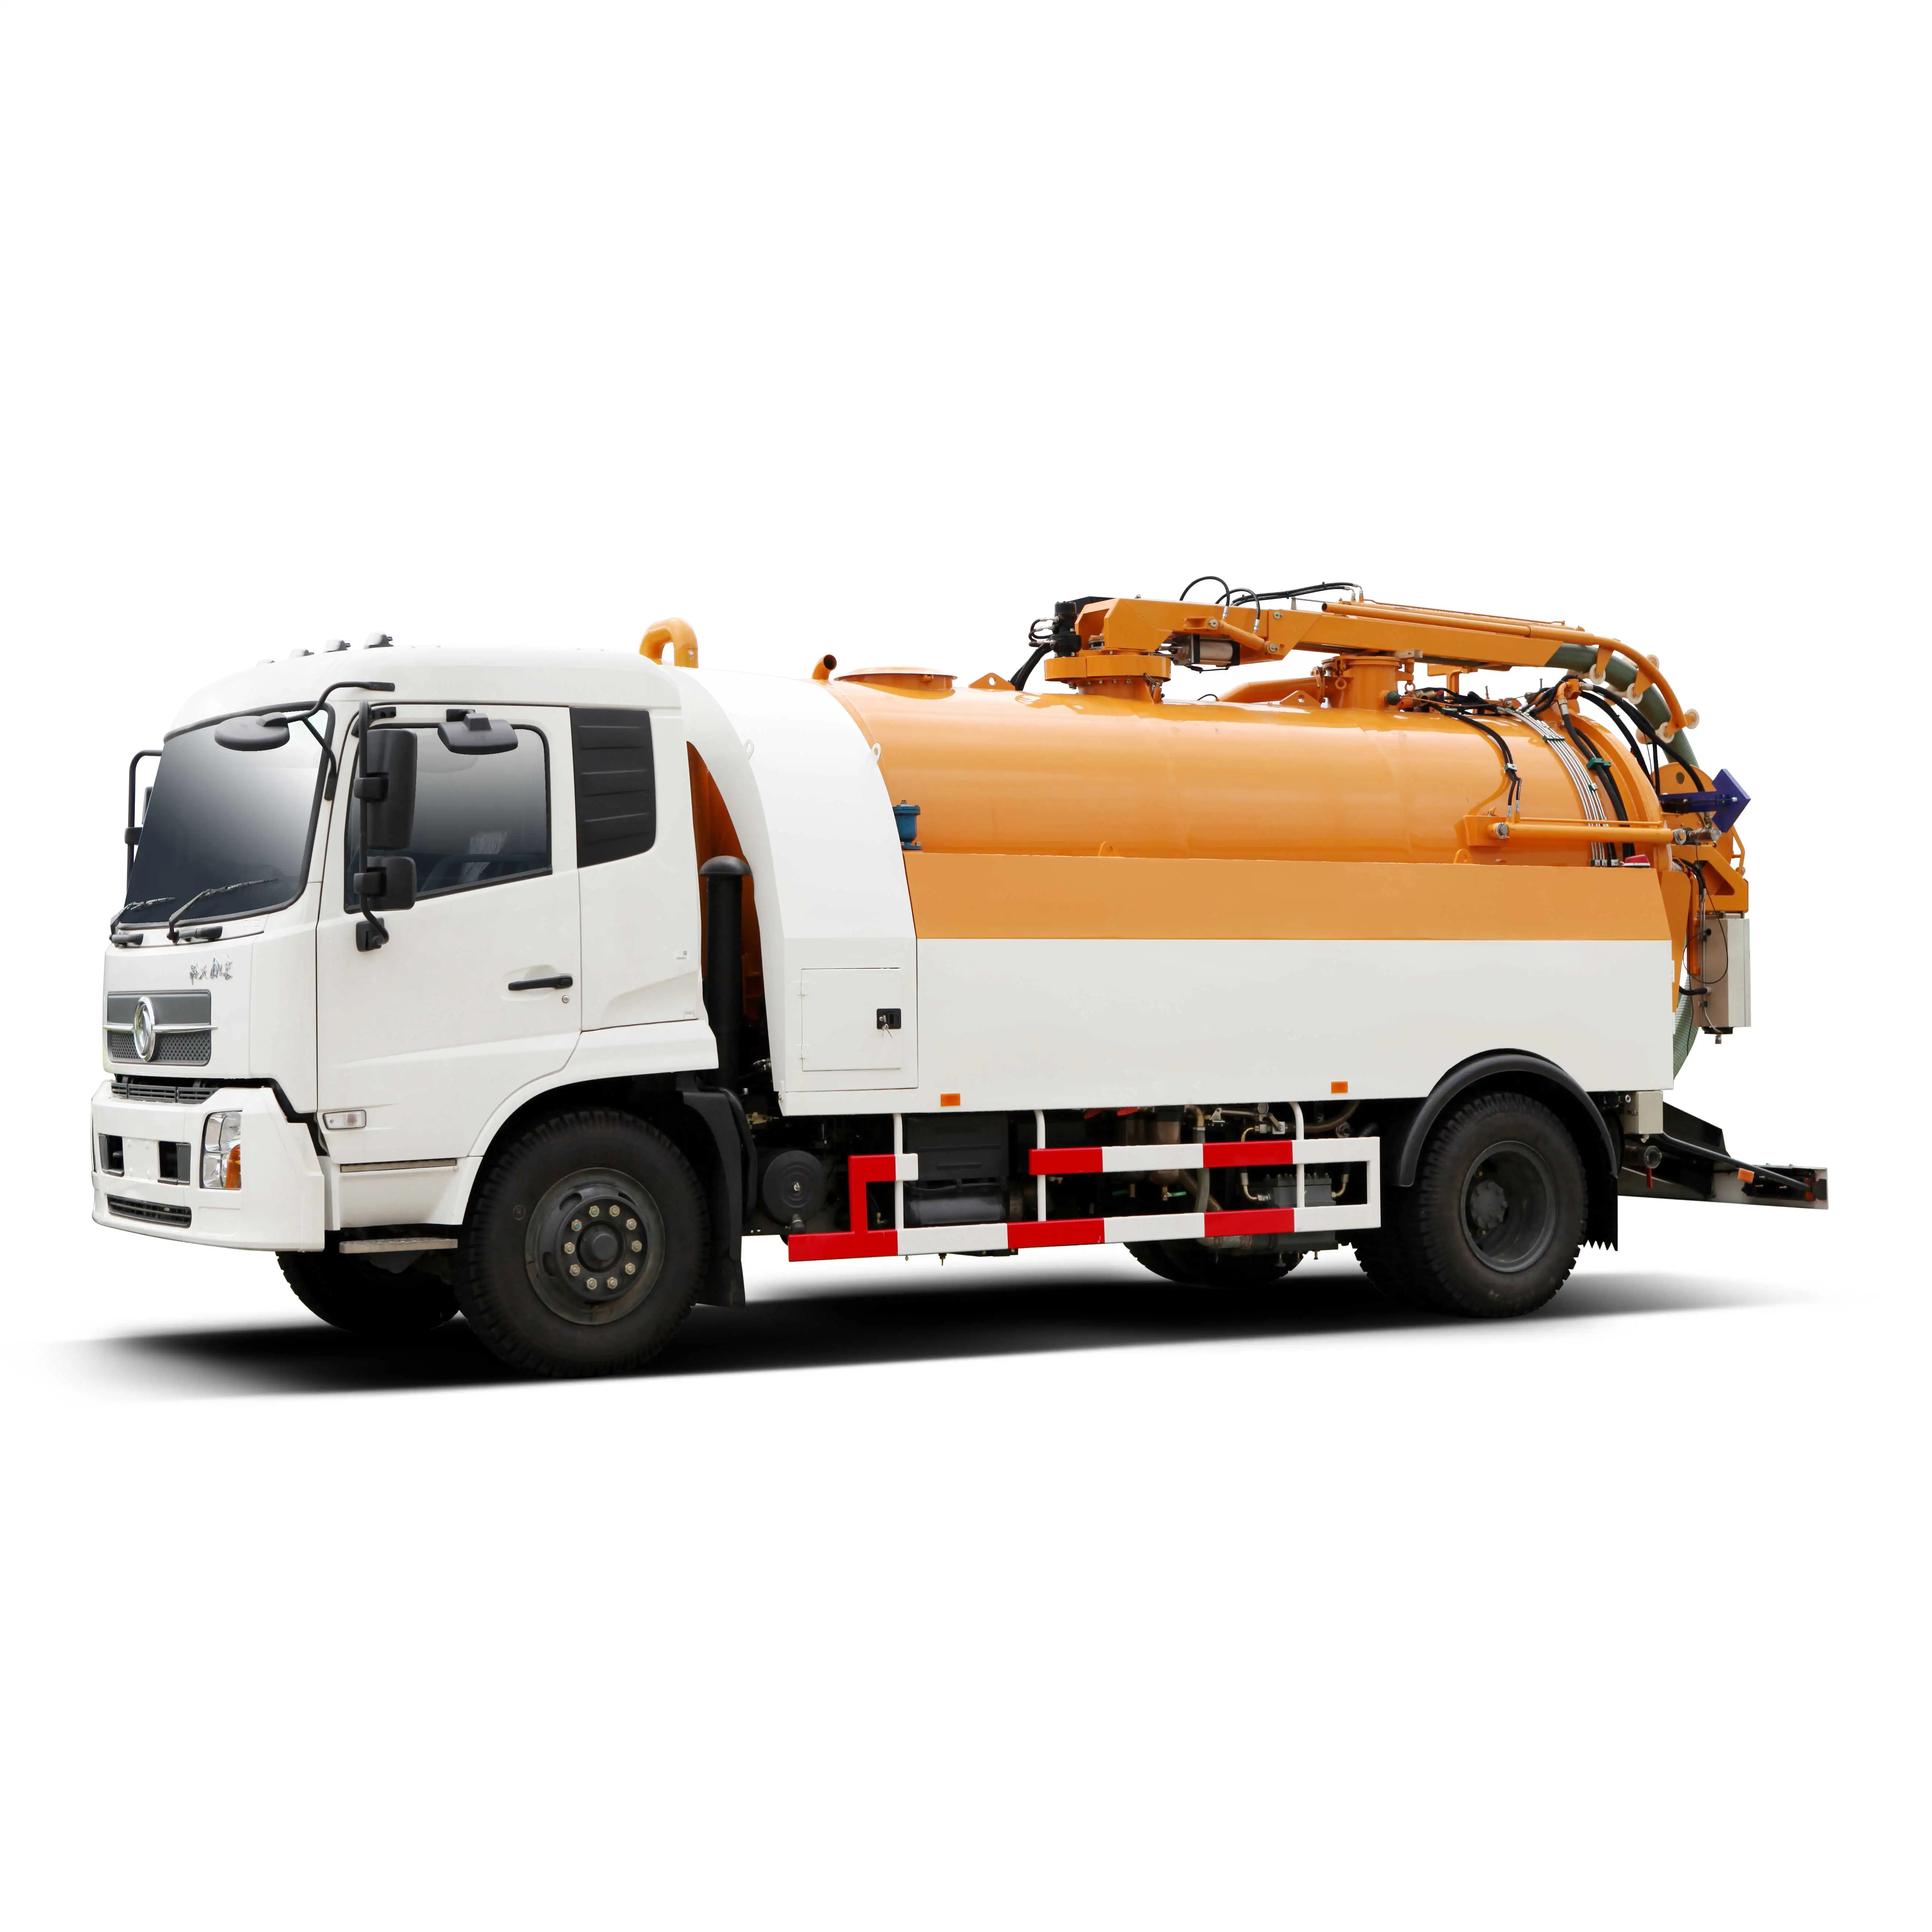 FULONGMA sewer jetting truck hydro jetter high pressure jetting nozzles sewer jetters